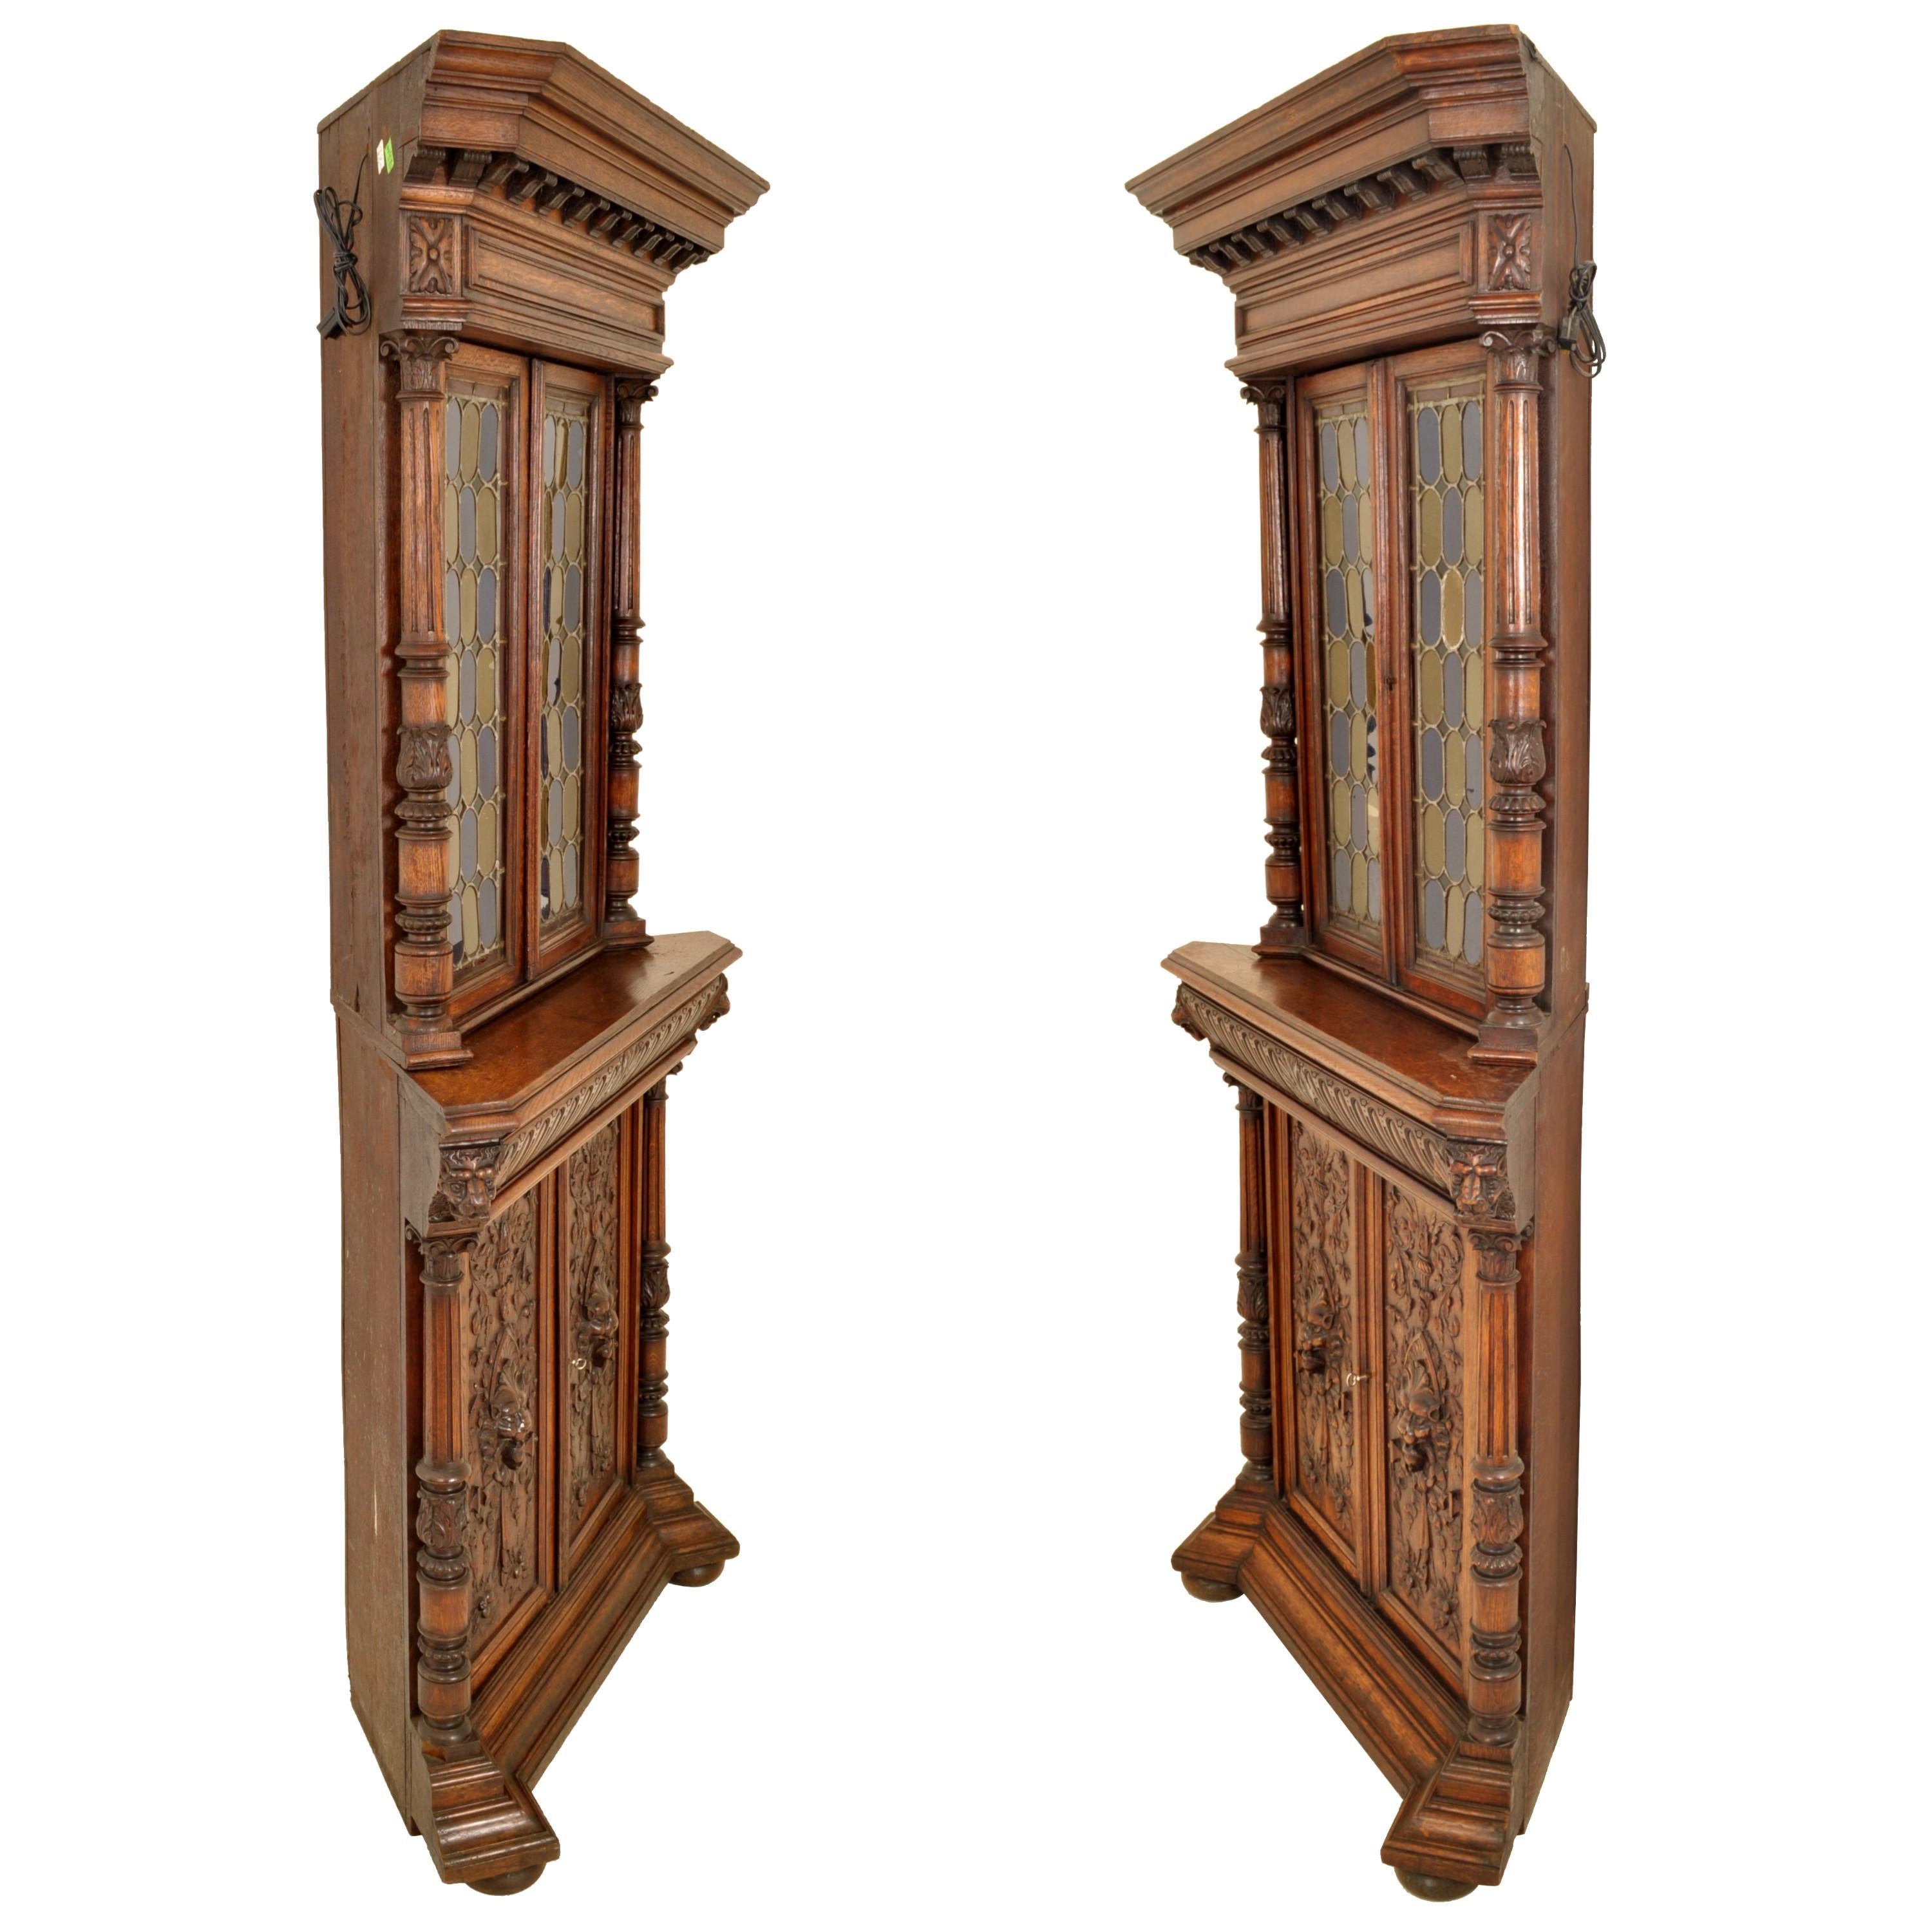 A magnificent & rare pair of antique French Renaissance Revival carved oak and leaded stained glass corner cabinets, circa 1880.
Each cabinet comprises two sections having a stepped cornice with corbel bracket supports to the top, the top section